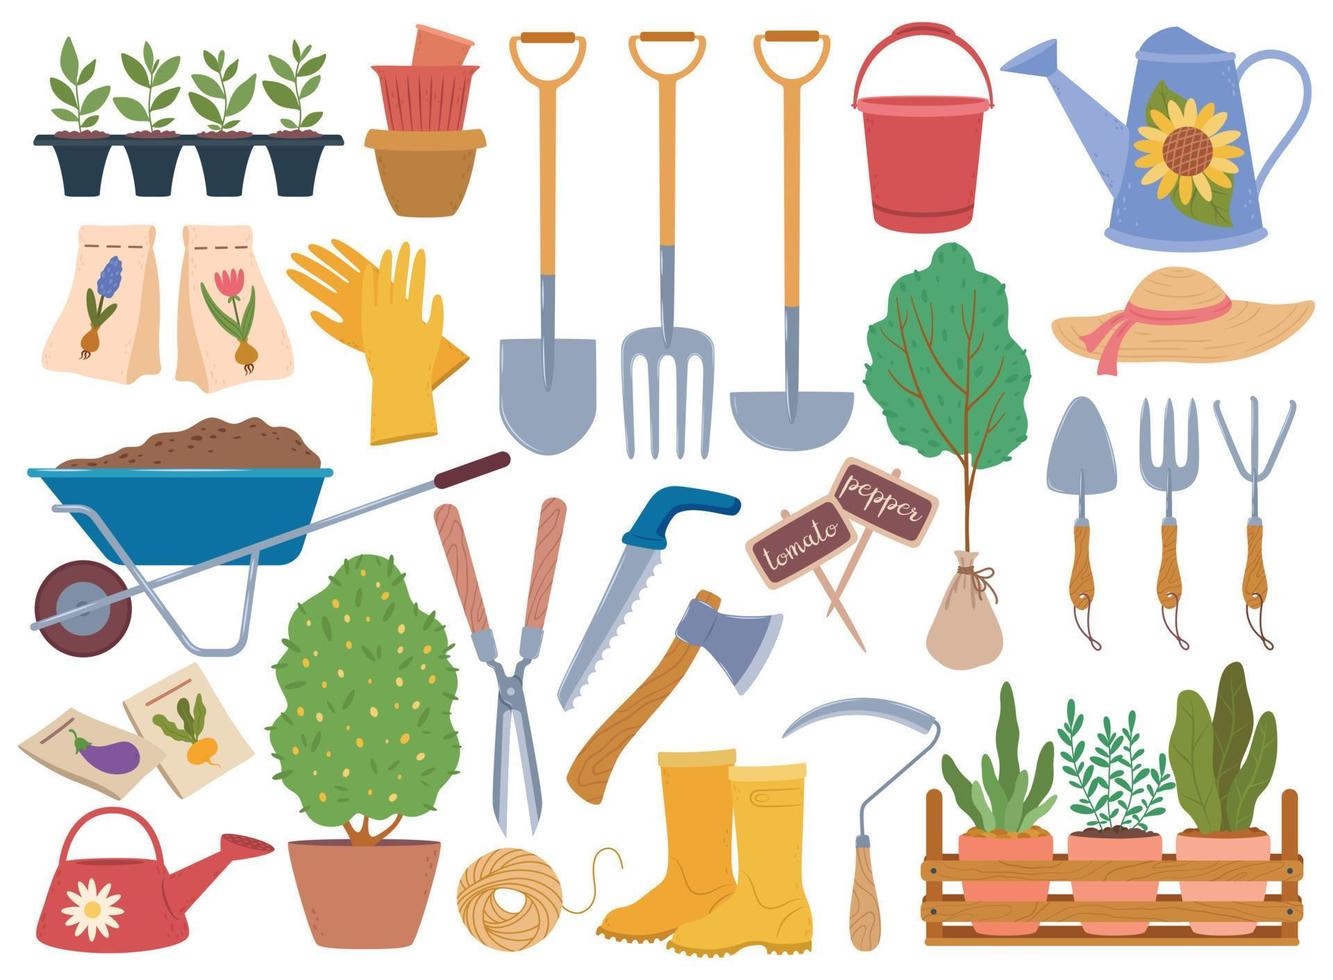 Gardening tools, spring garden equipment and plants sapling. Watering can, gloves, wheelbarrow with soil. Horticulture elements vector set